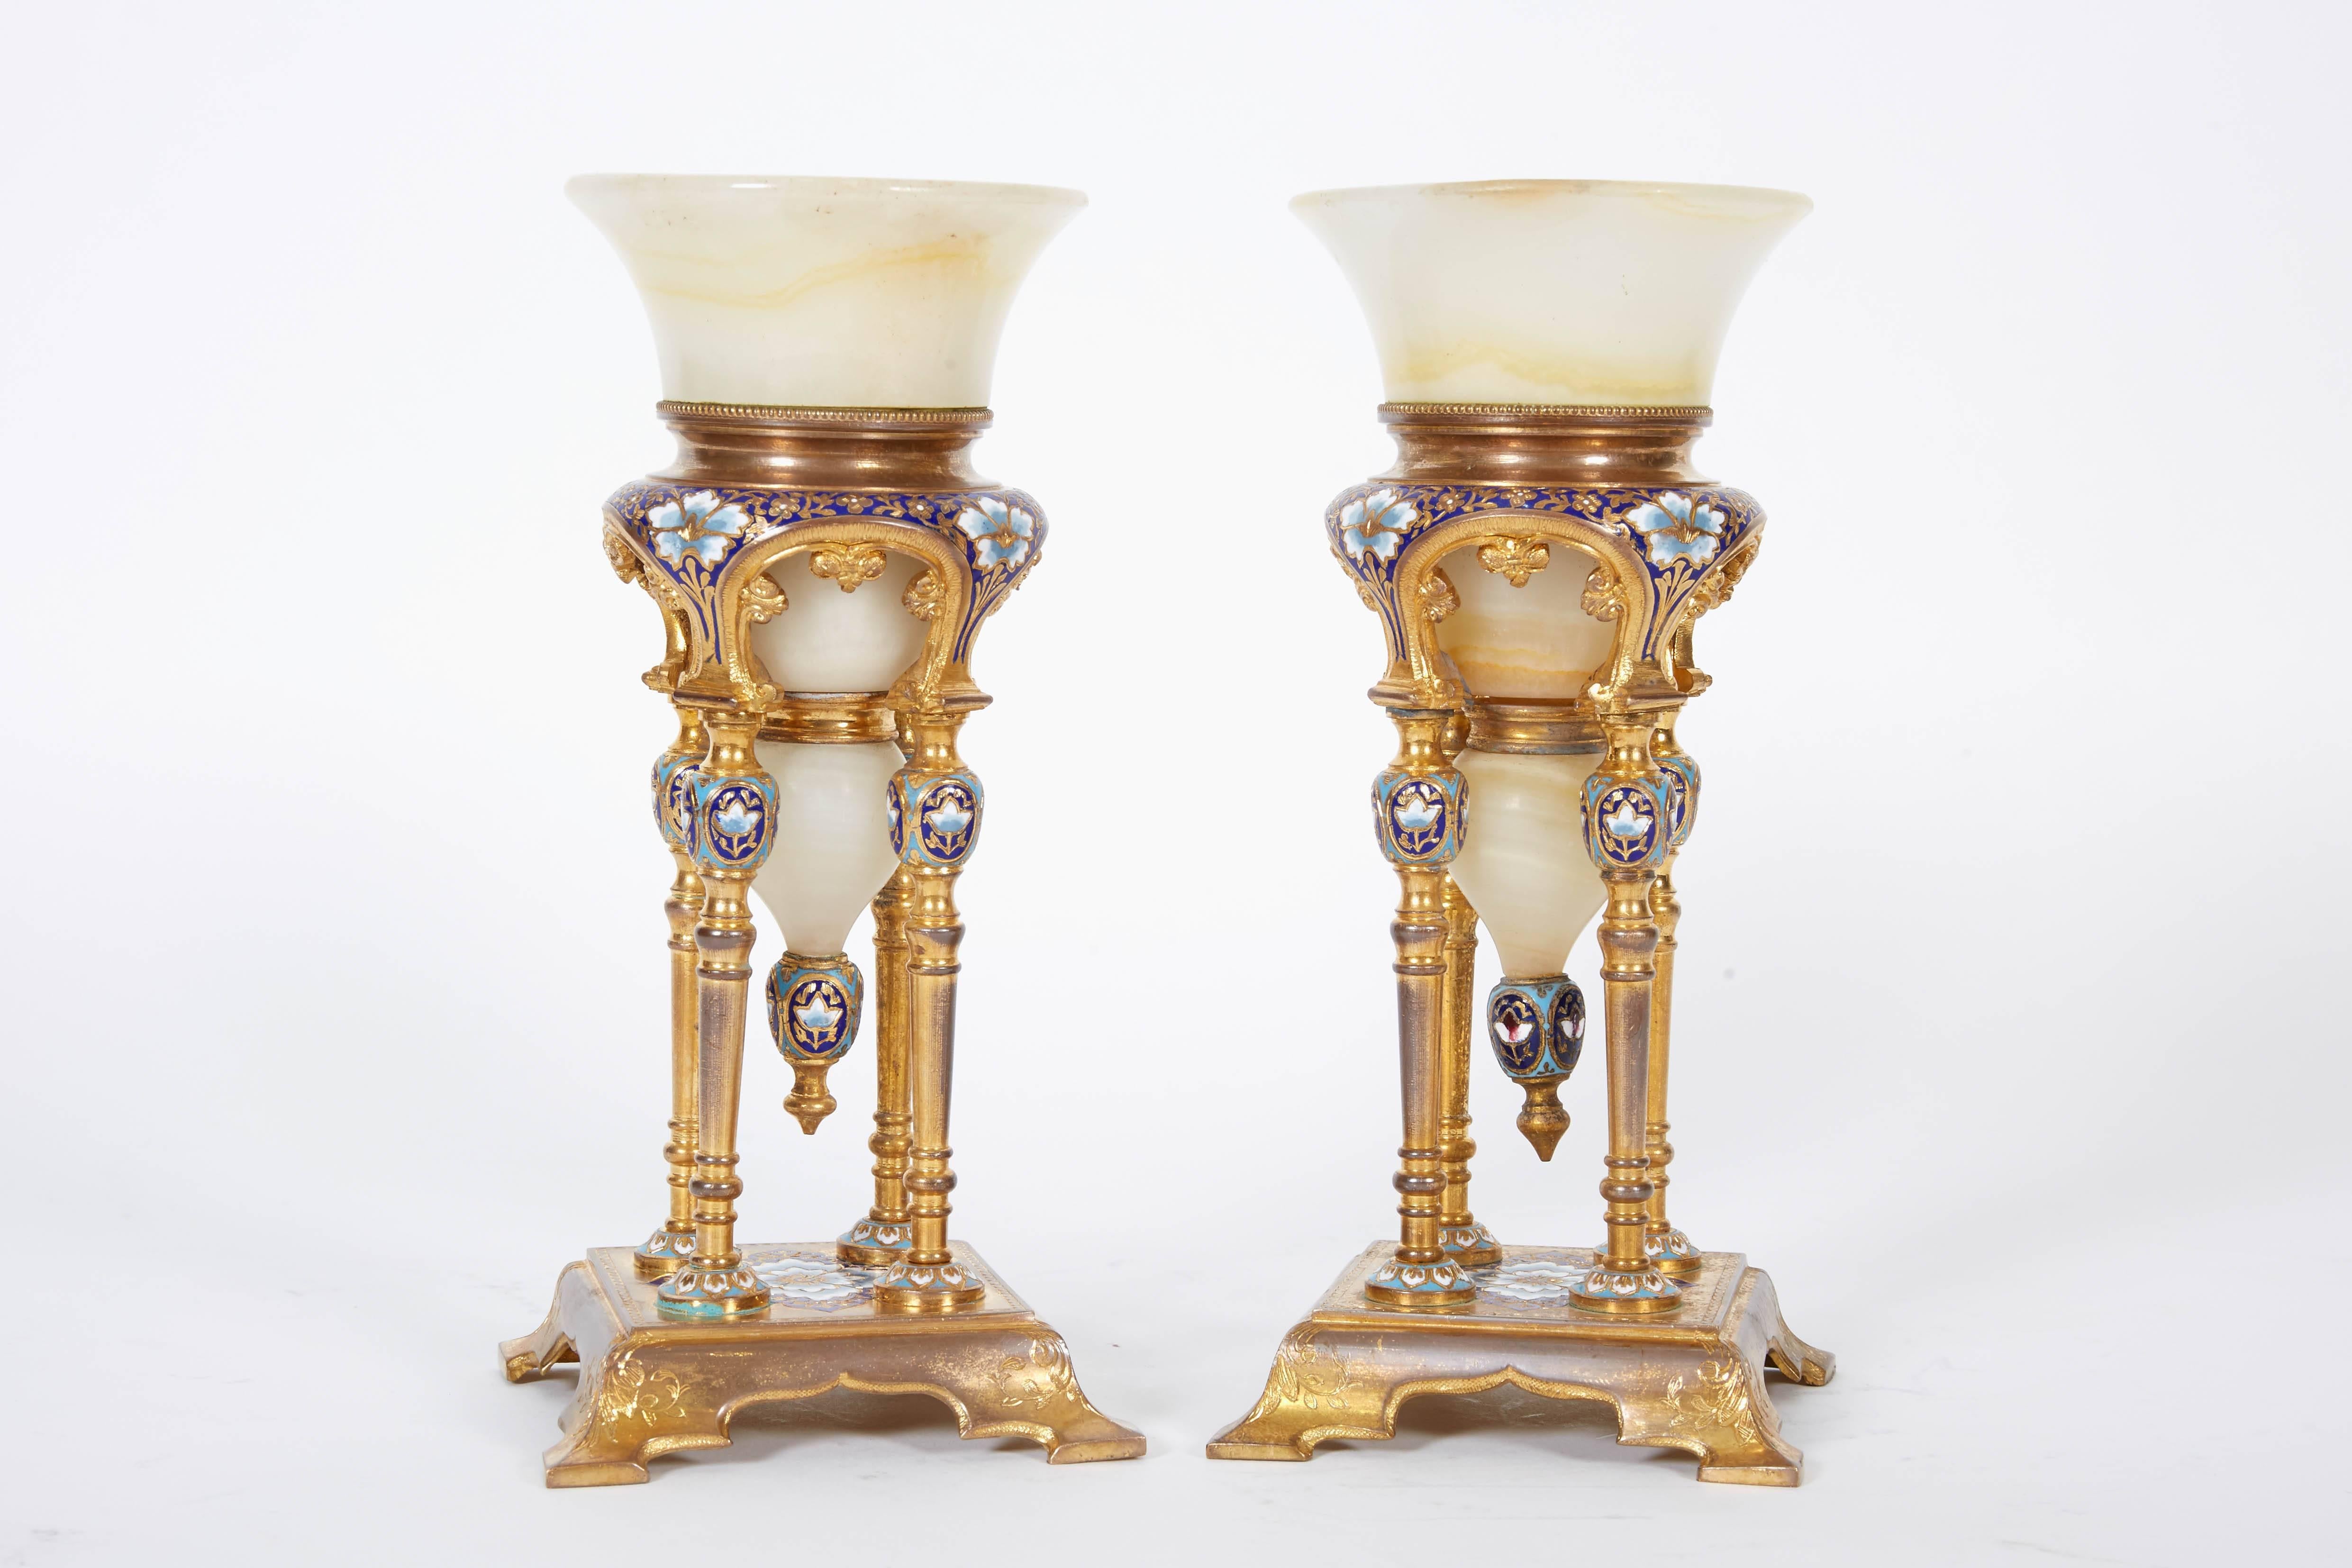 A pair of French bronze, Champleve enamel and onyx bowls / vases in the orientalist Islamic taste,
late 19th century.

Attributed to Eugene Cornu / Louchet Freres.

Very high quality. Excellent condition.

Measures: 6.5